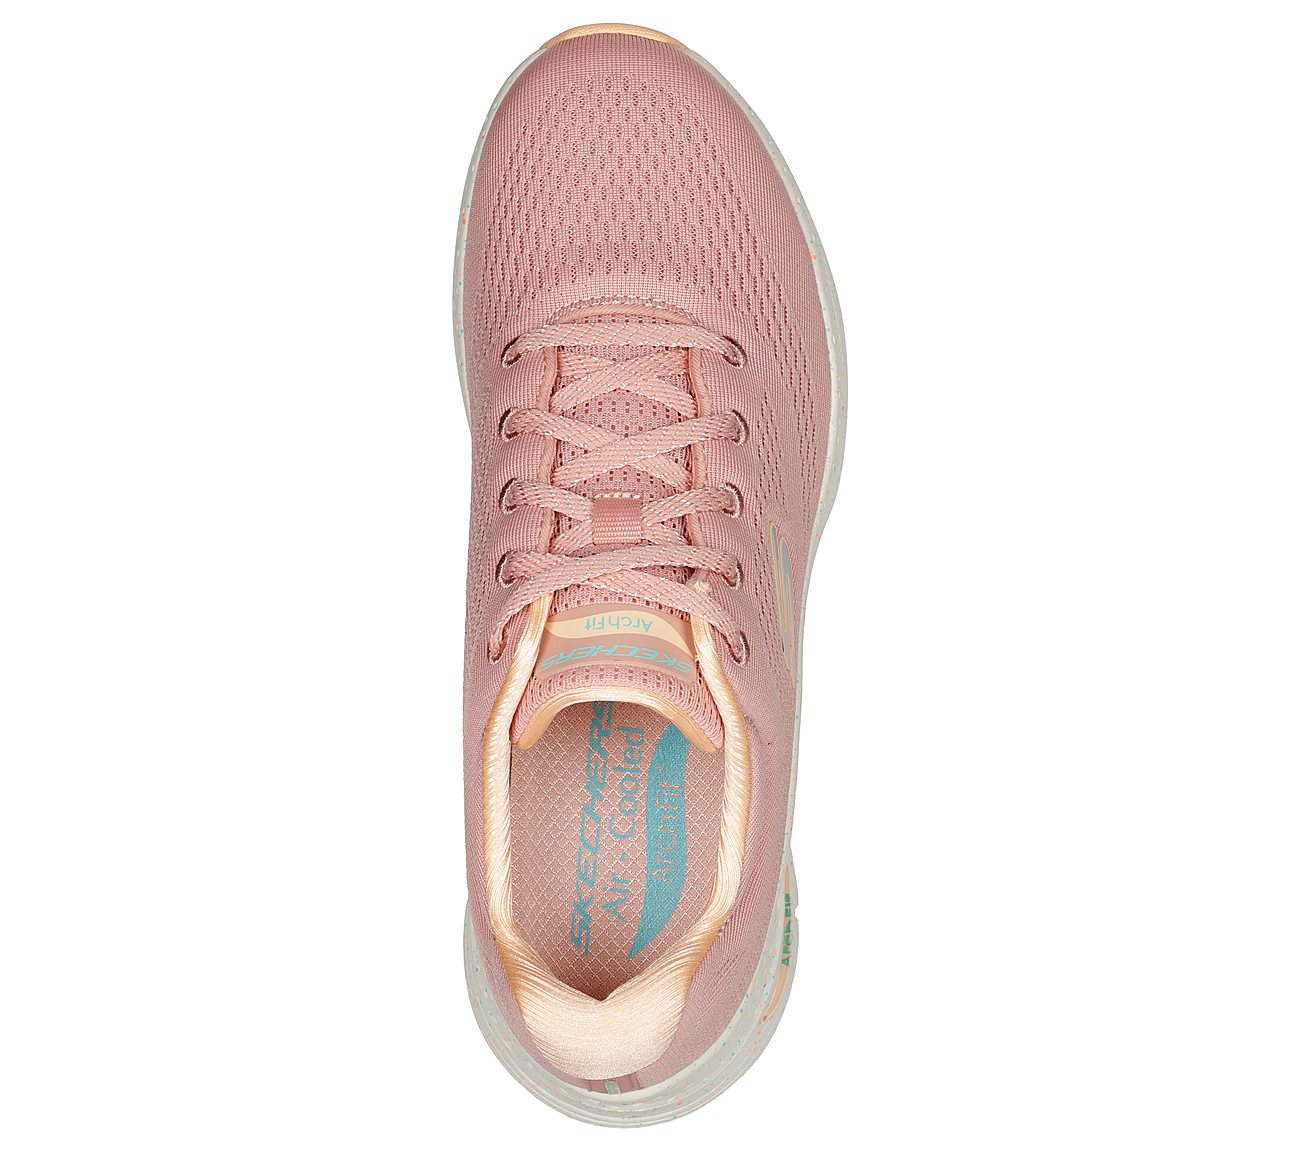 ARCH FIT, PINK/MULTI Footwear Top View